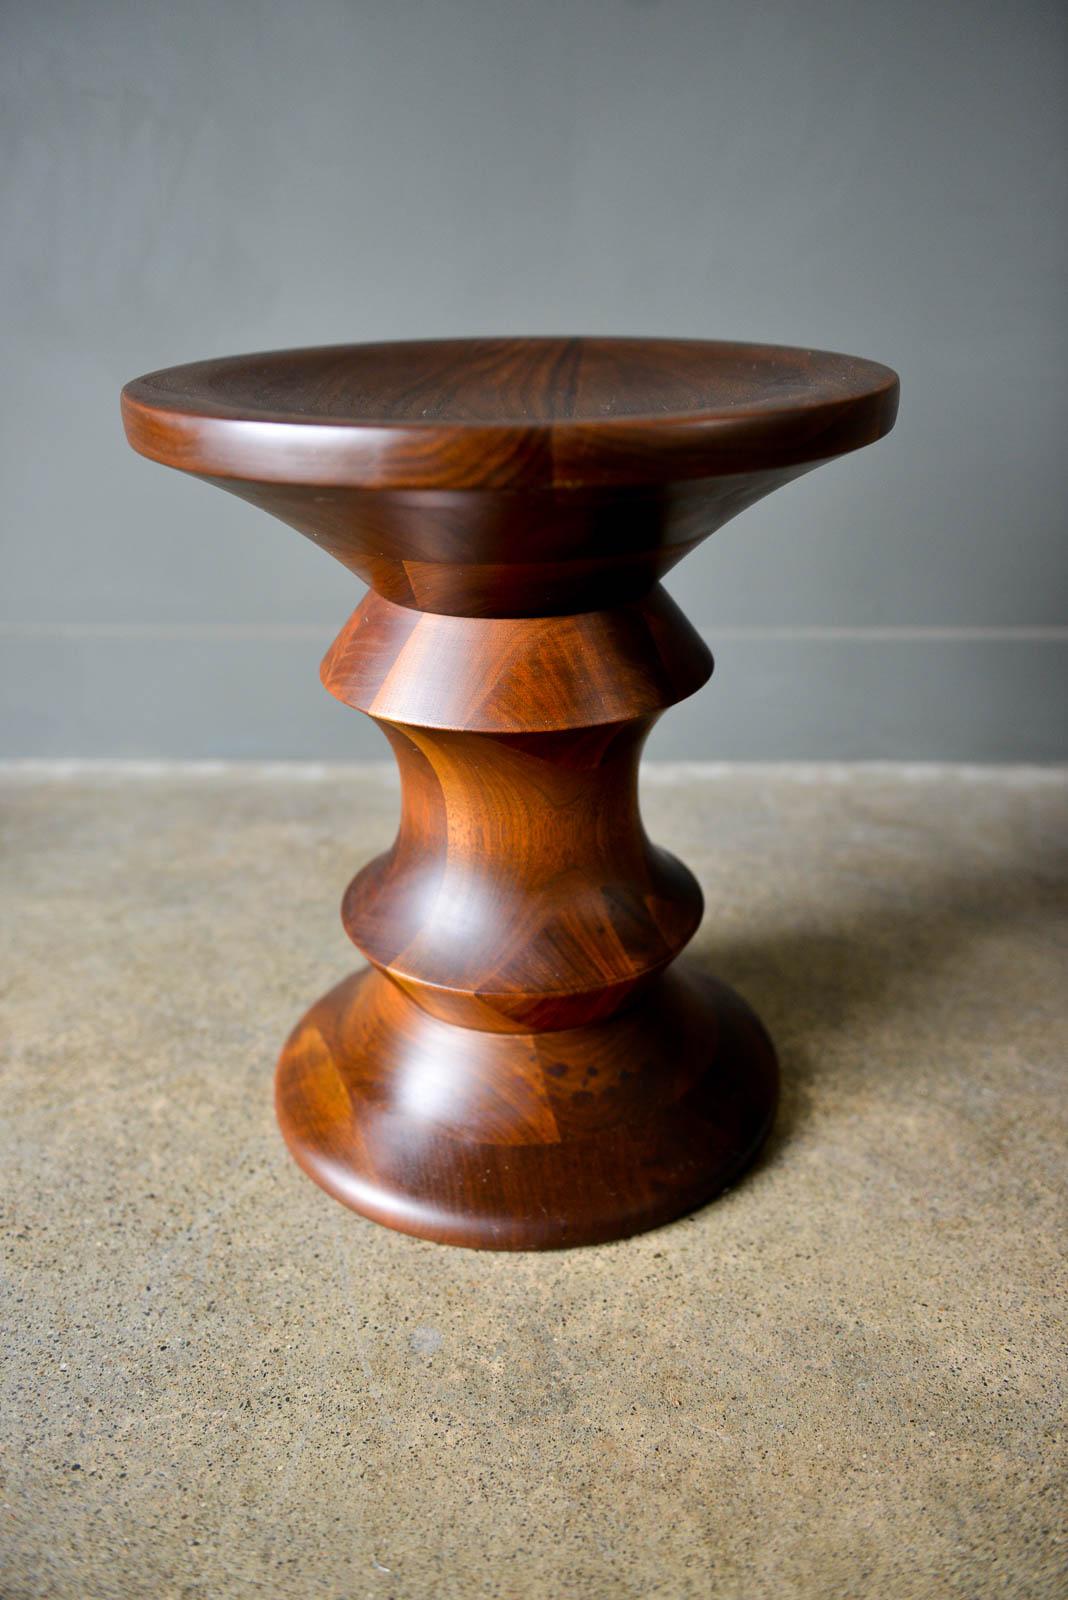 Vintage Charles Eames Time Life walnut stool model 'A', circa 1965. Original condition with hand oiled finish. Very good to excellent as shown in photos. 

Measures: 15